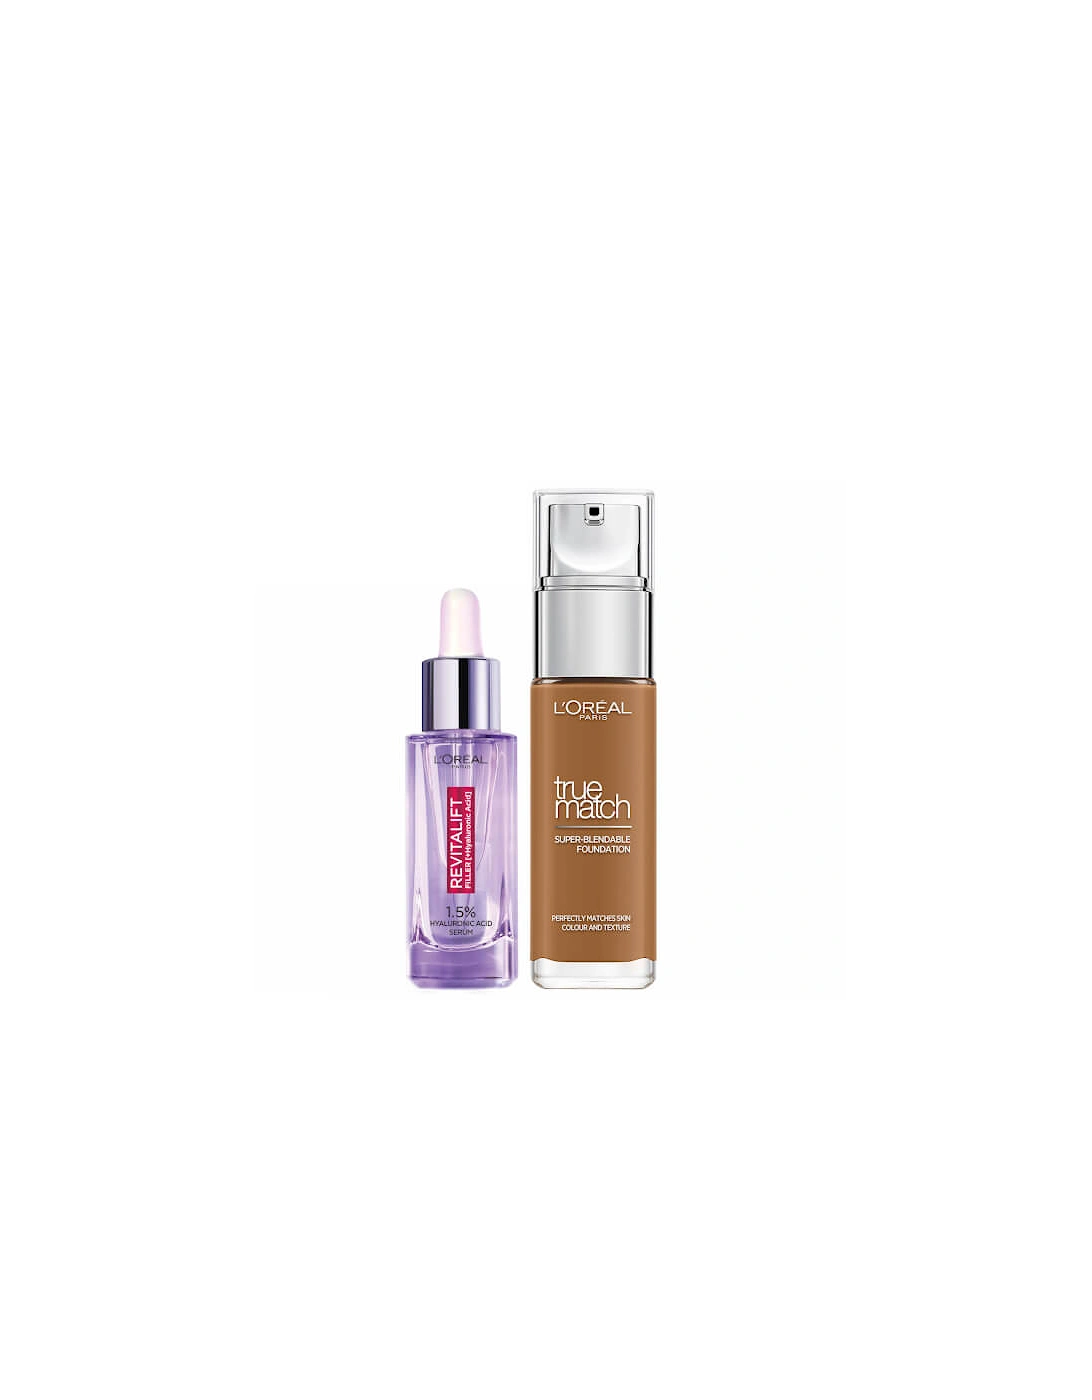 L’Oreal Paris Hyaluronic Acid Filler Serum and True Match Hyaluronic Acid Foundation Duo - 9N Truffle, 2 of 1